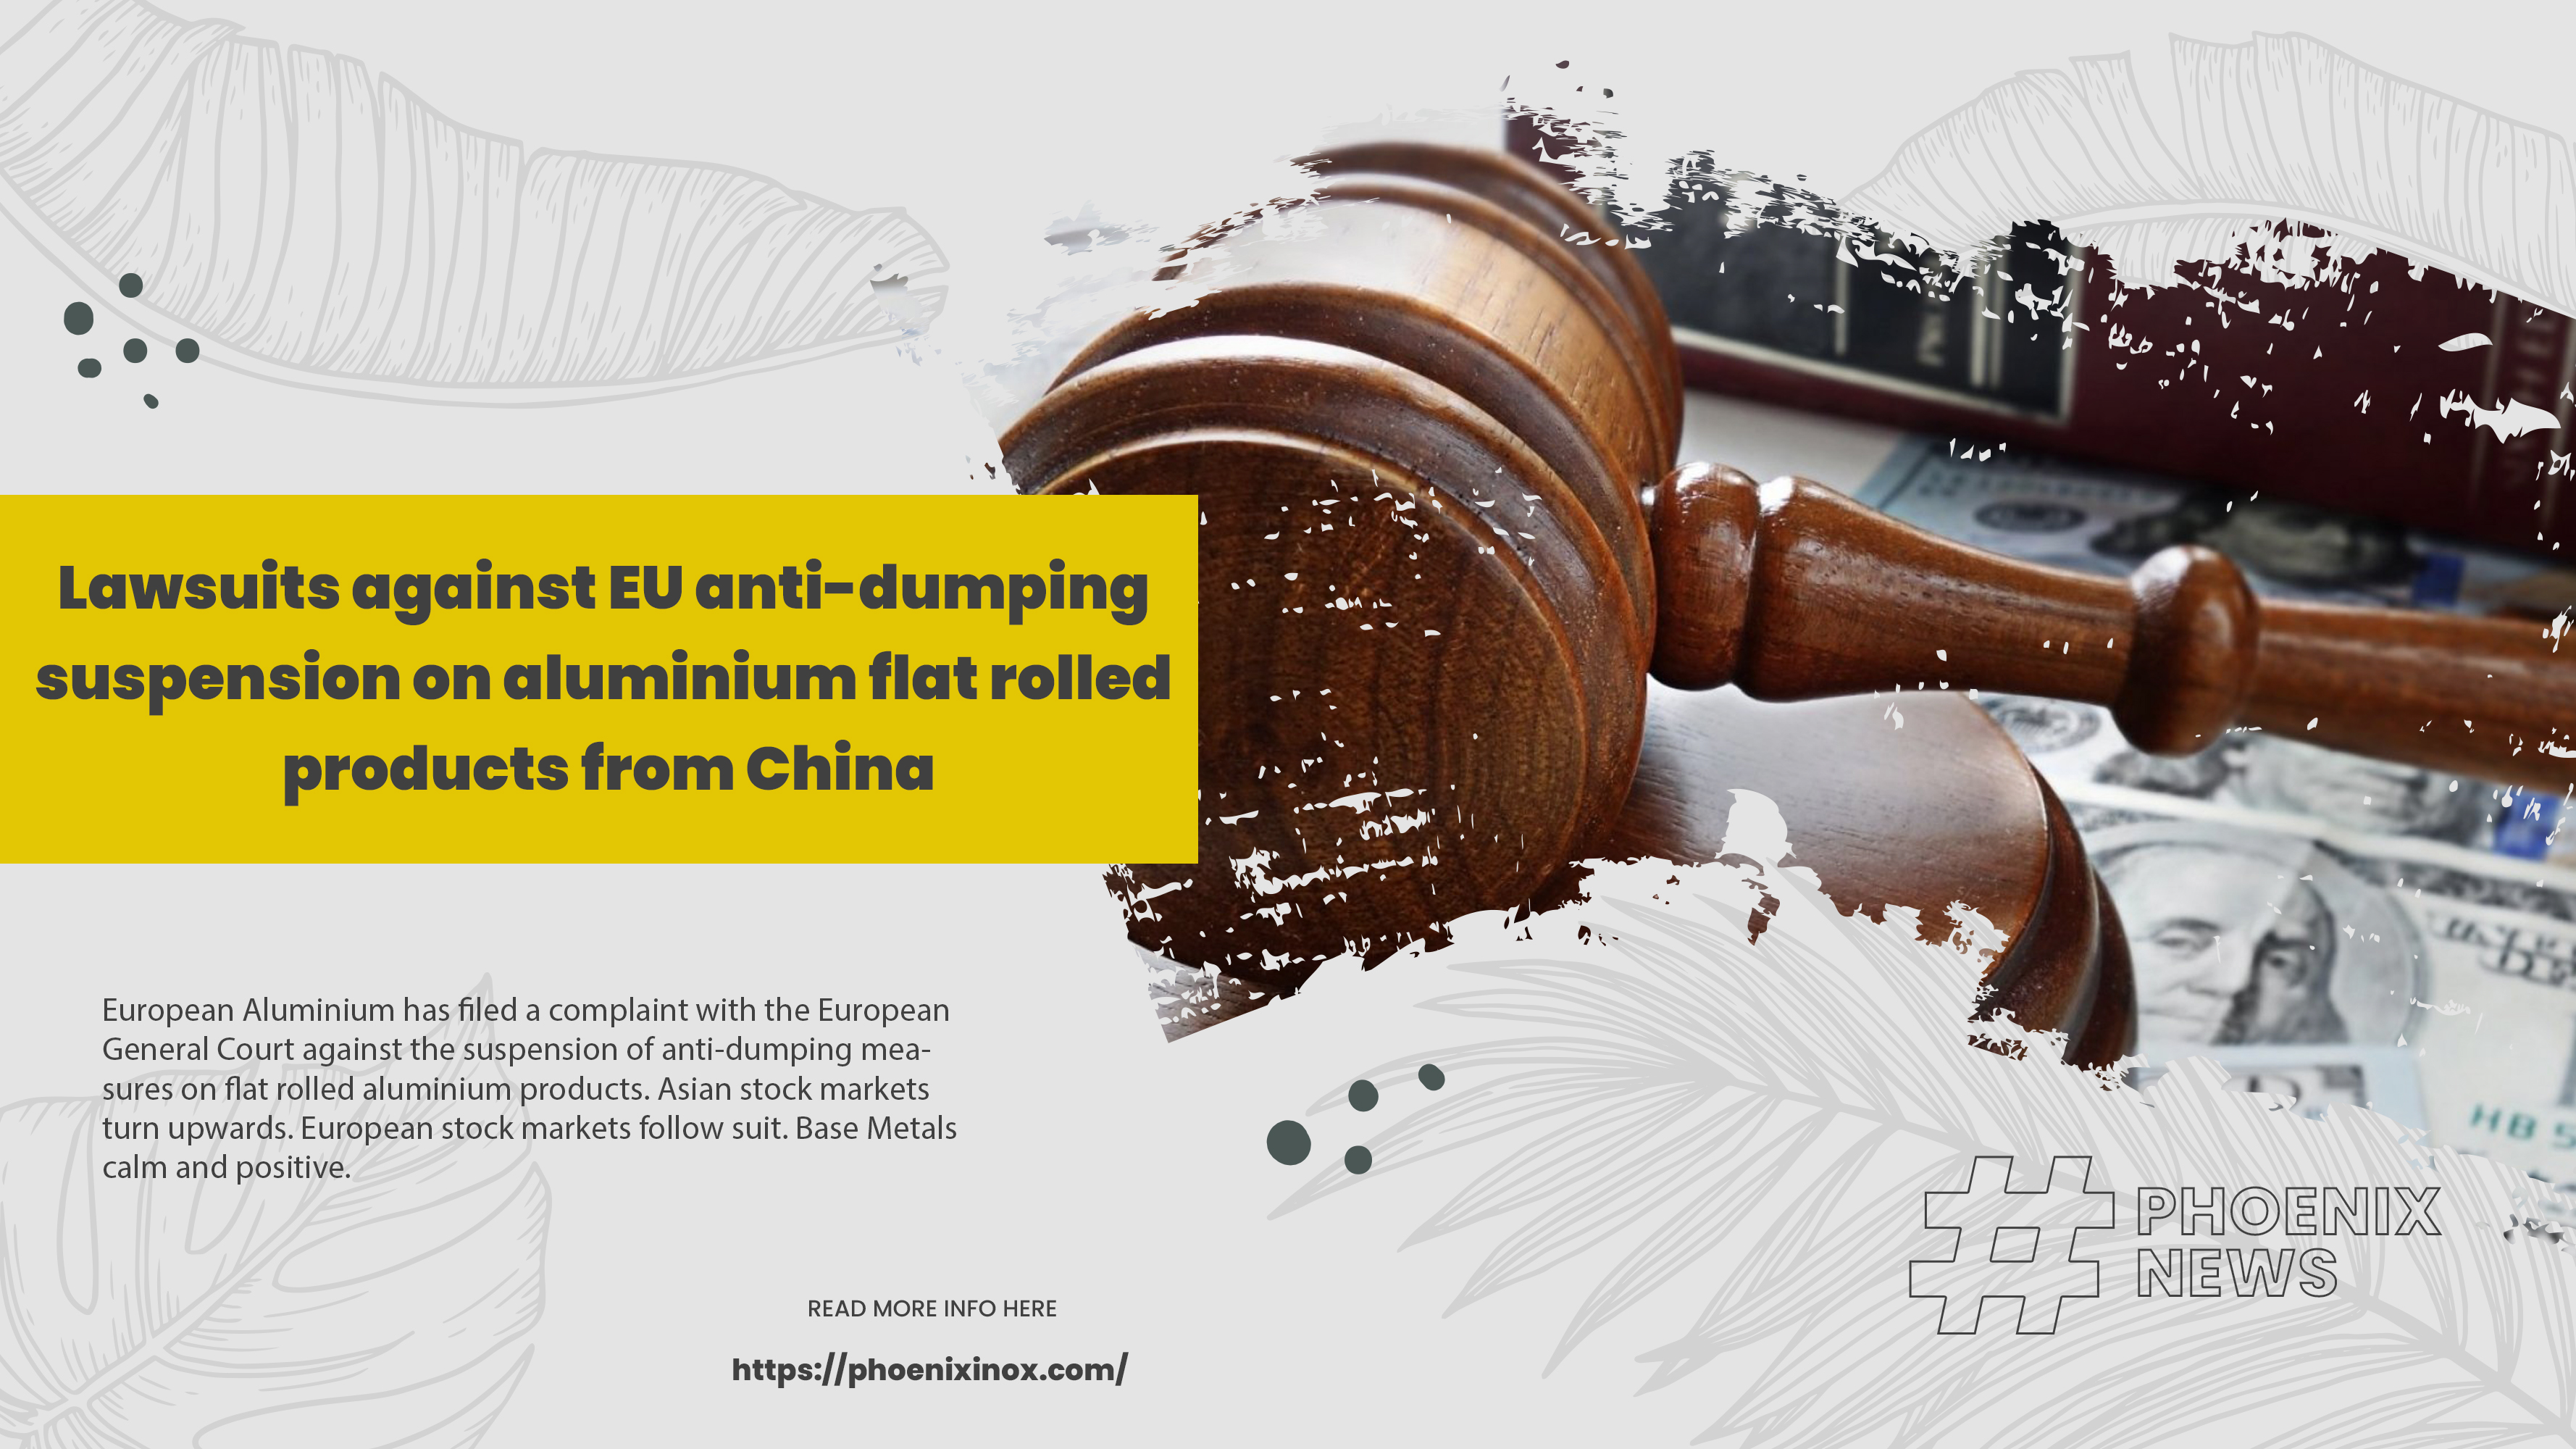 LAWSUITS AGAINST EU ANTI-DUMPING SUSPENSION ON ALUMINIUM FLAT ROLLED PRODUCTS FROM CHINA